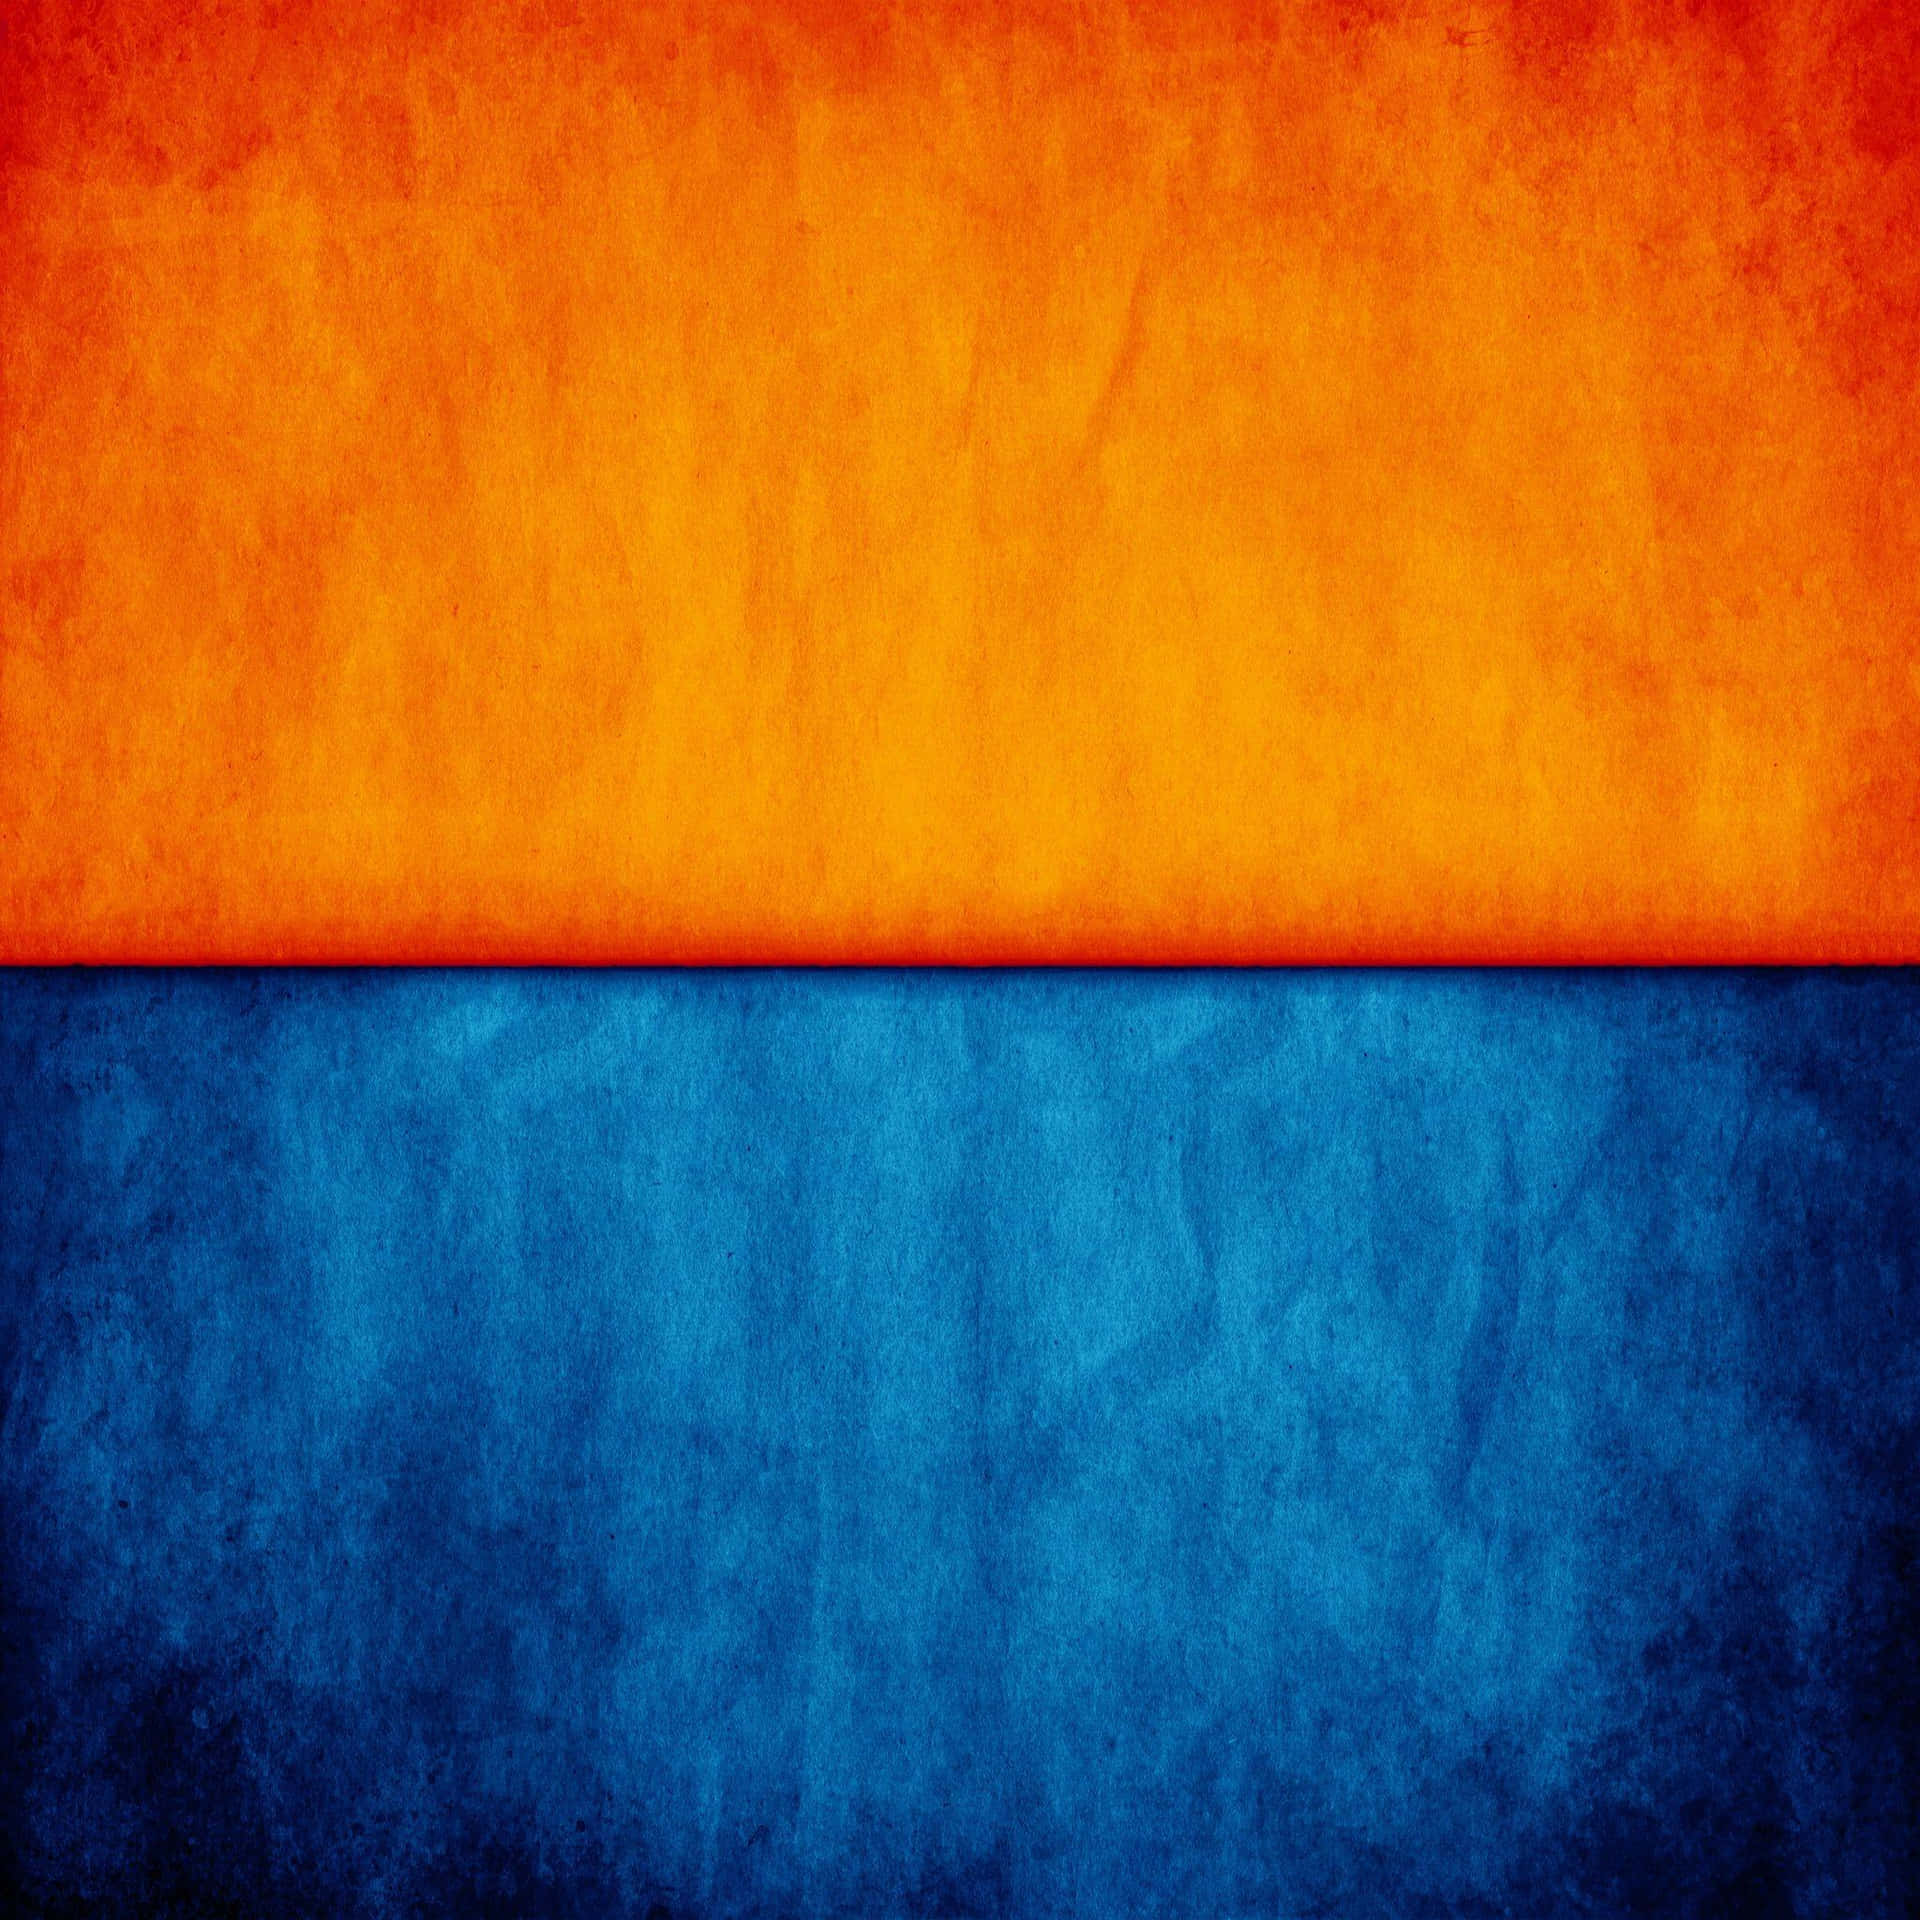 Vibrant Orange And Blue Abstract Background